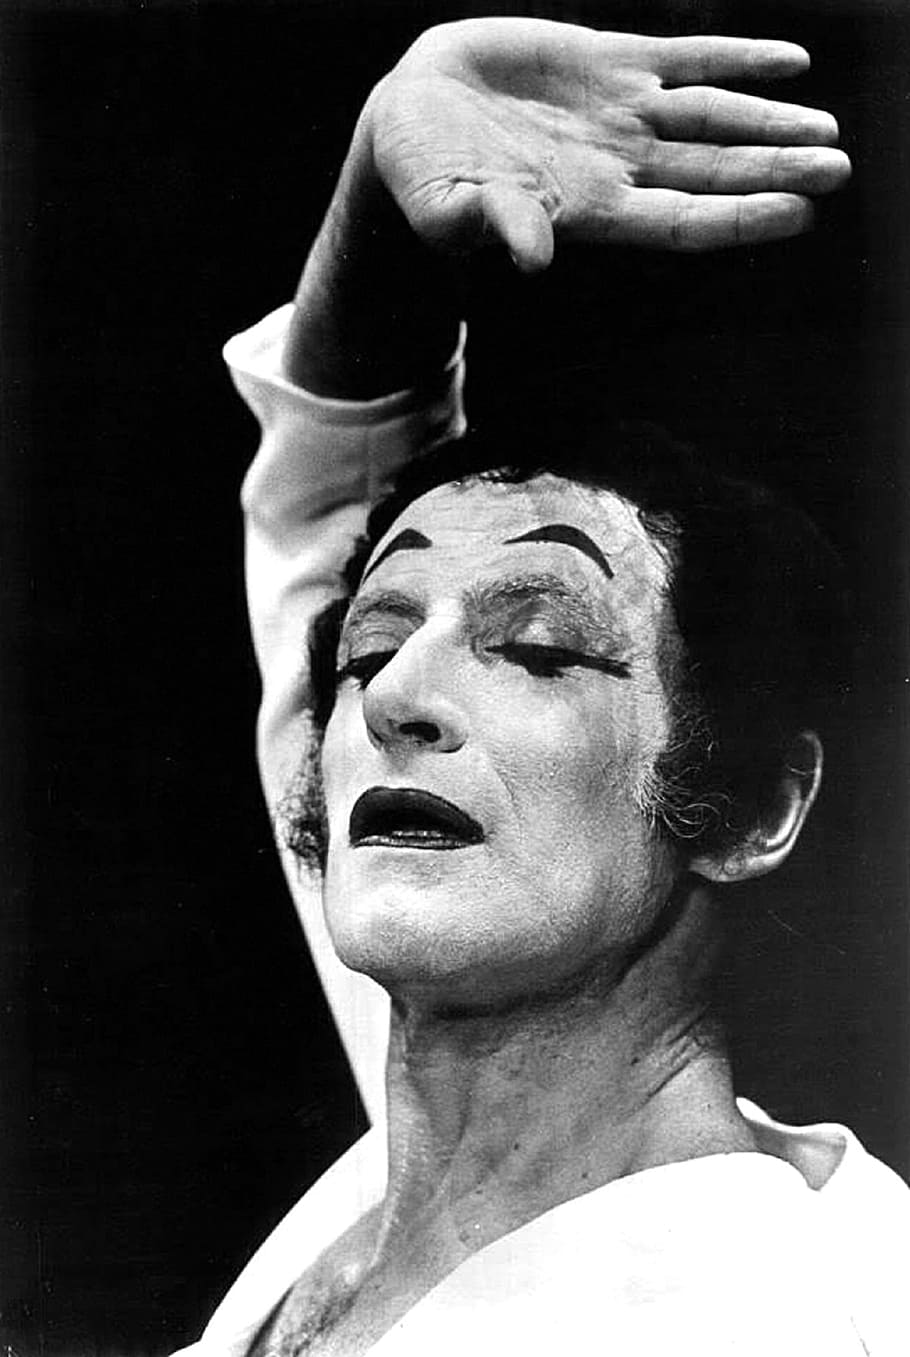 gray, scale photography, person dancing, marcel marceau, actor, mime, french, bip the clown, art of silence, famous